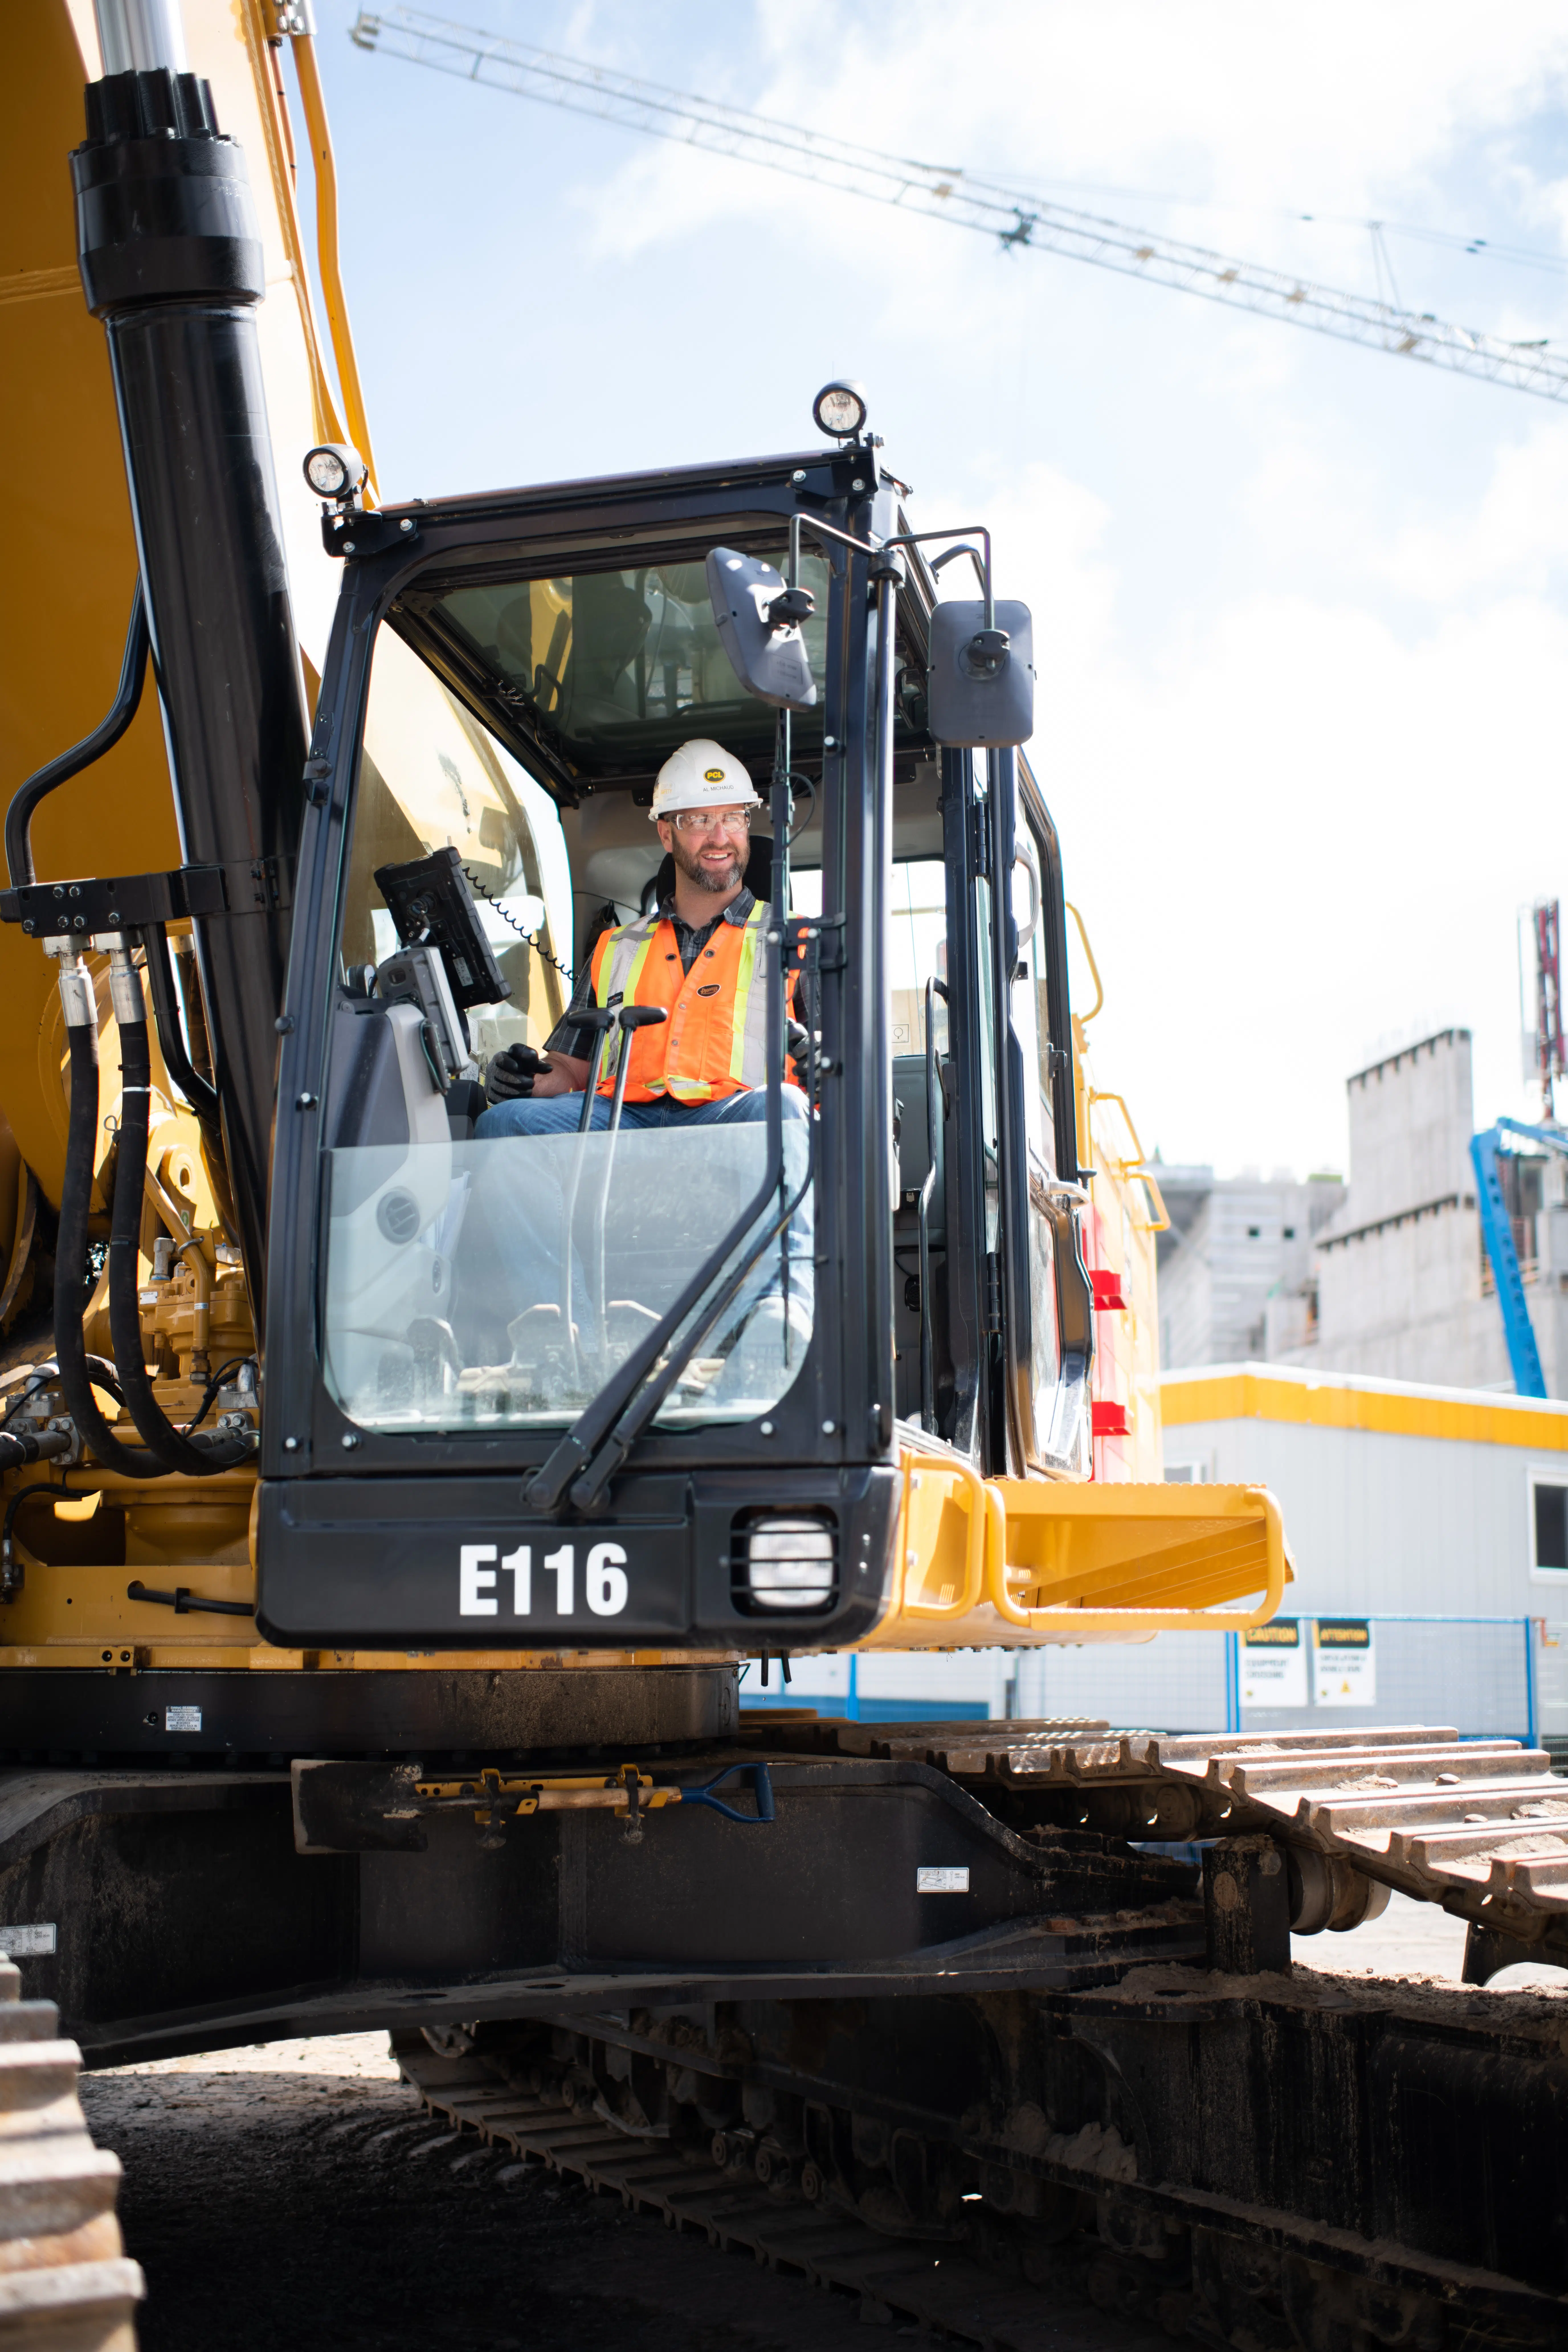 A worker operates a large excavator.